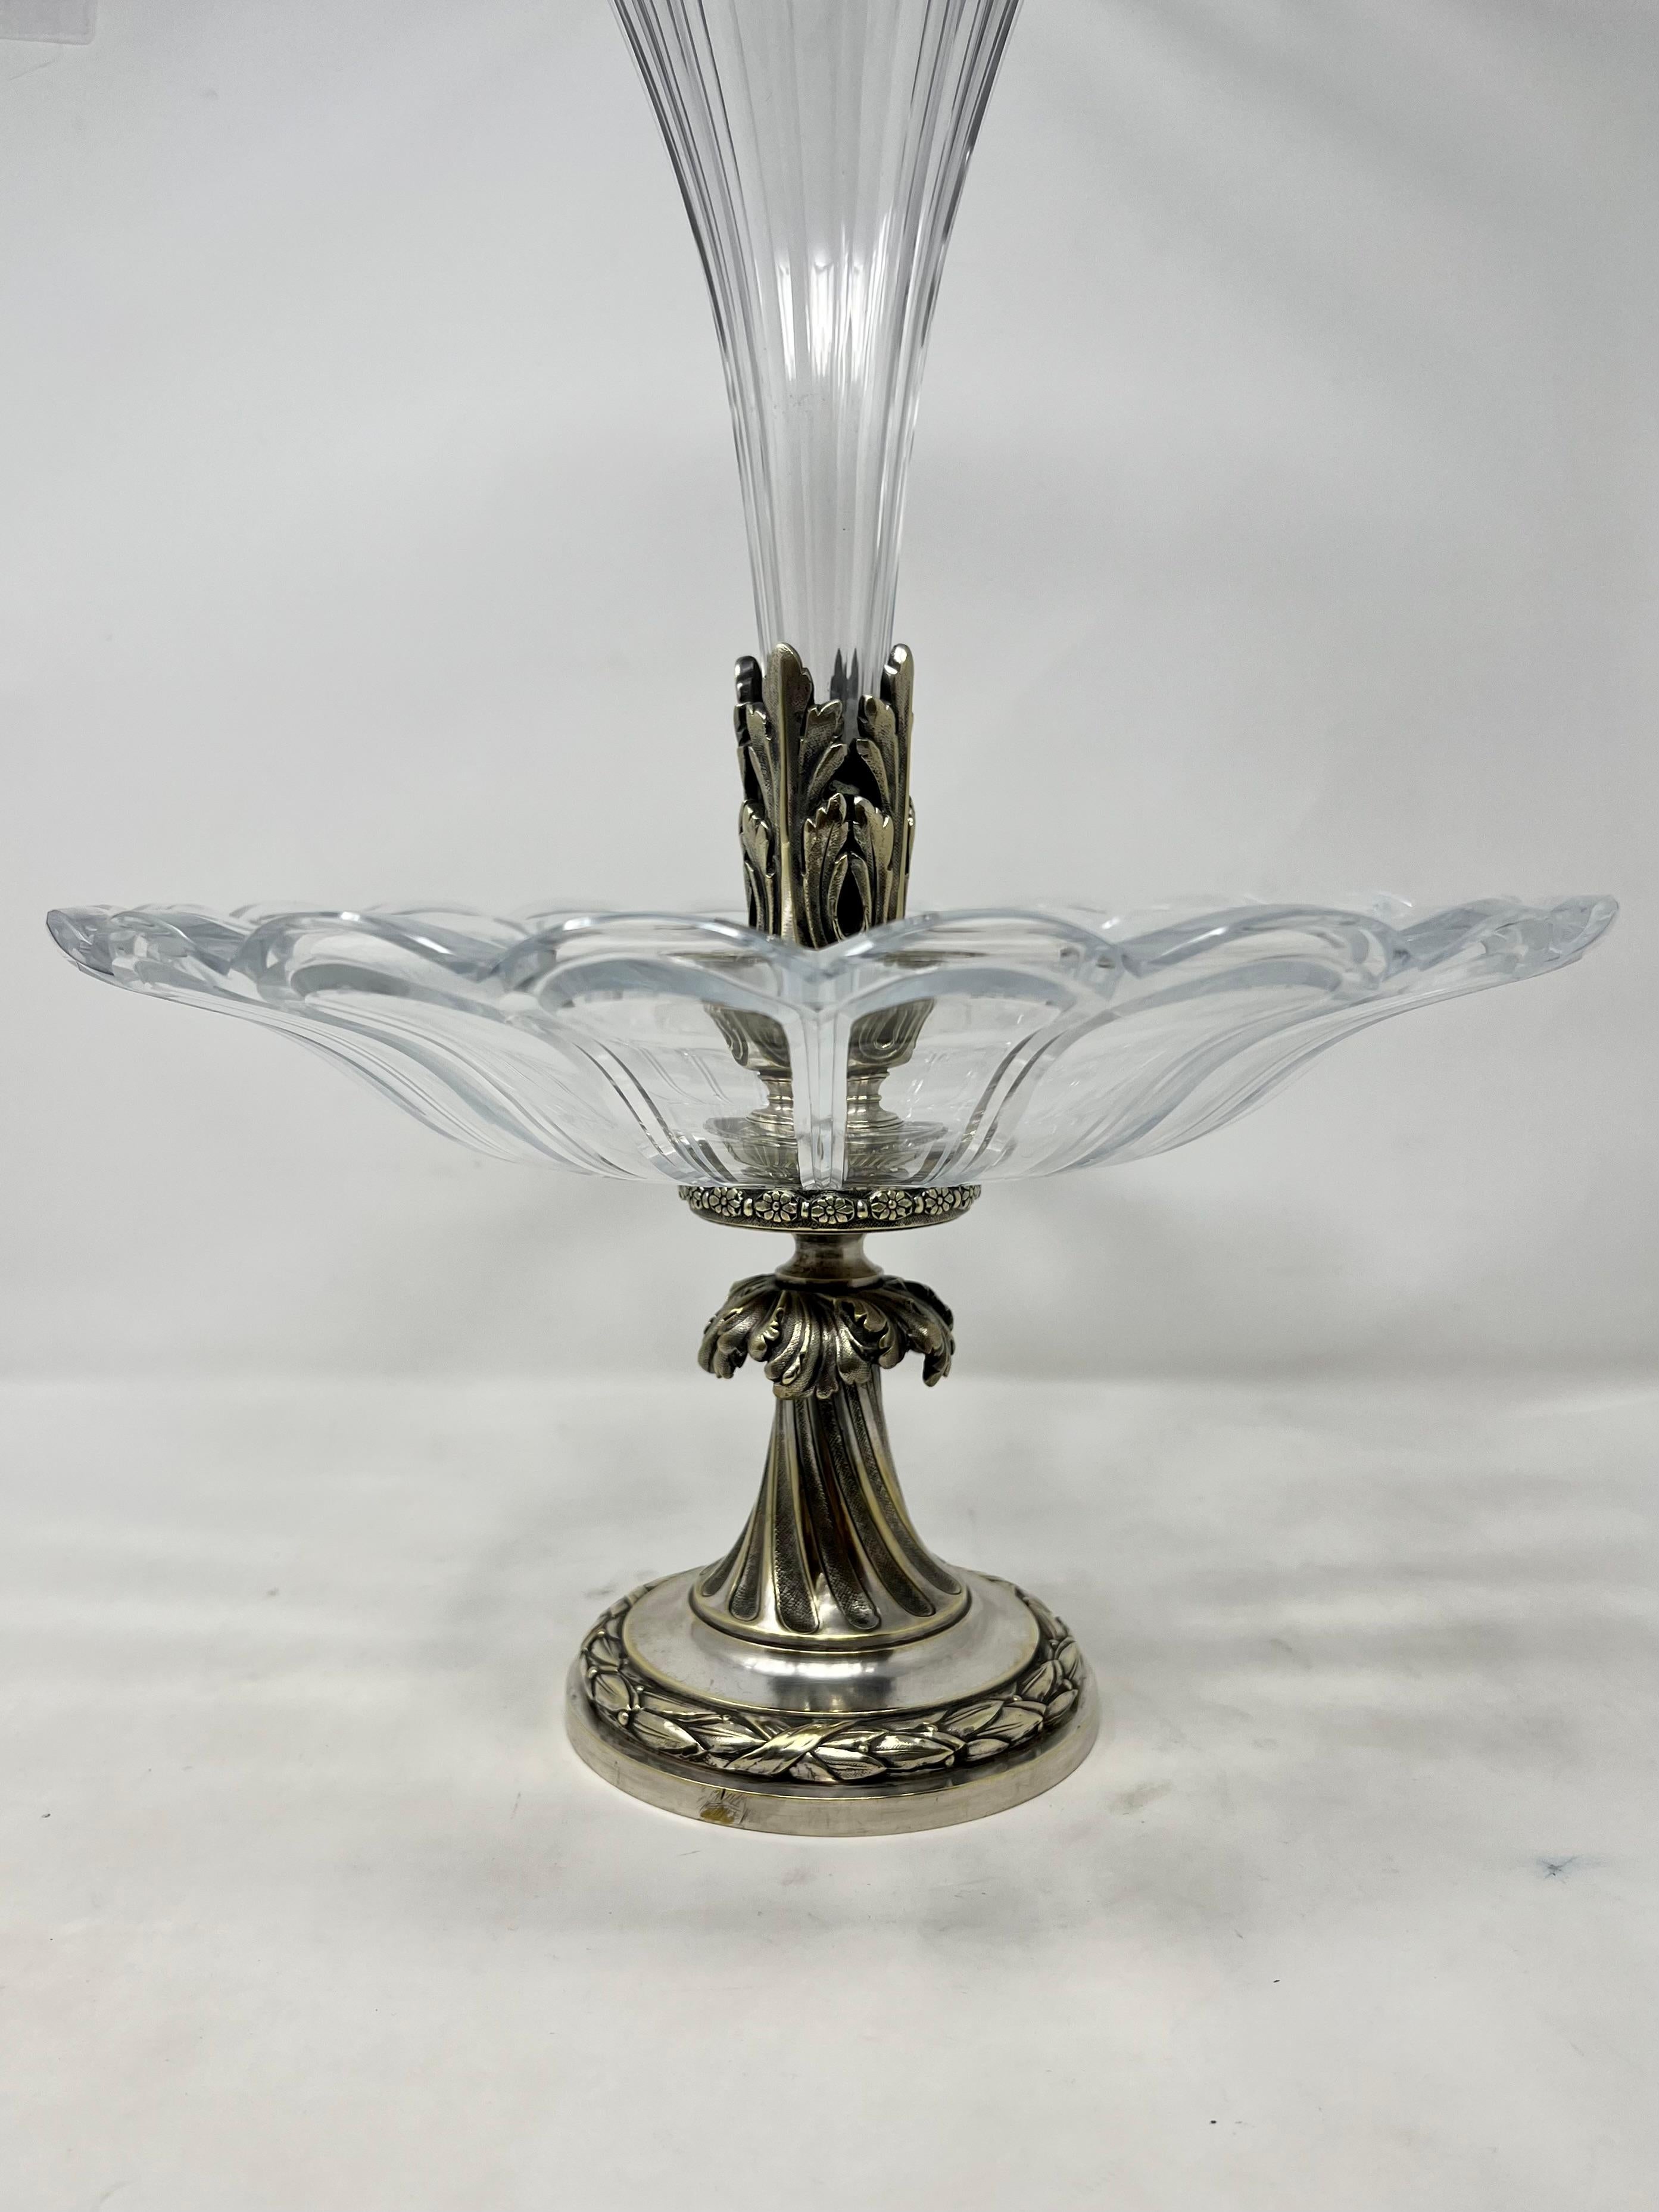 Antique French Silver on Bronze Baccarat Epergne circa 1865-75.